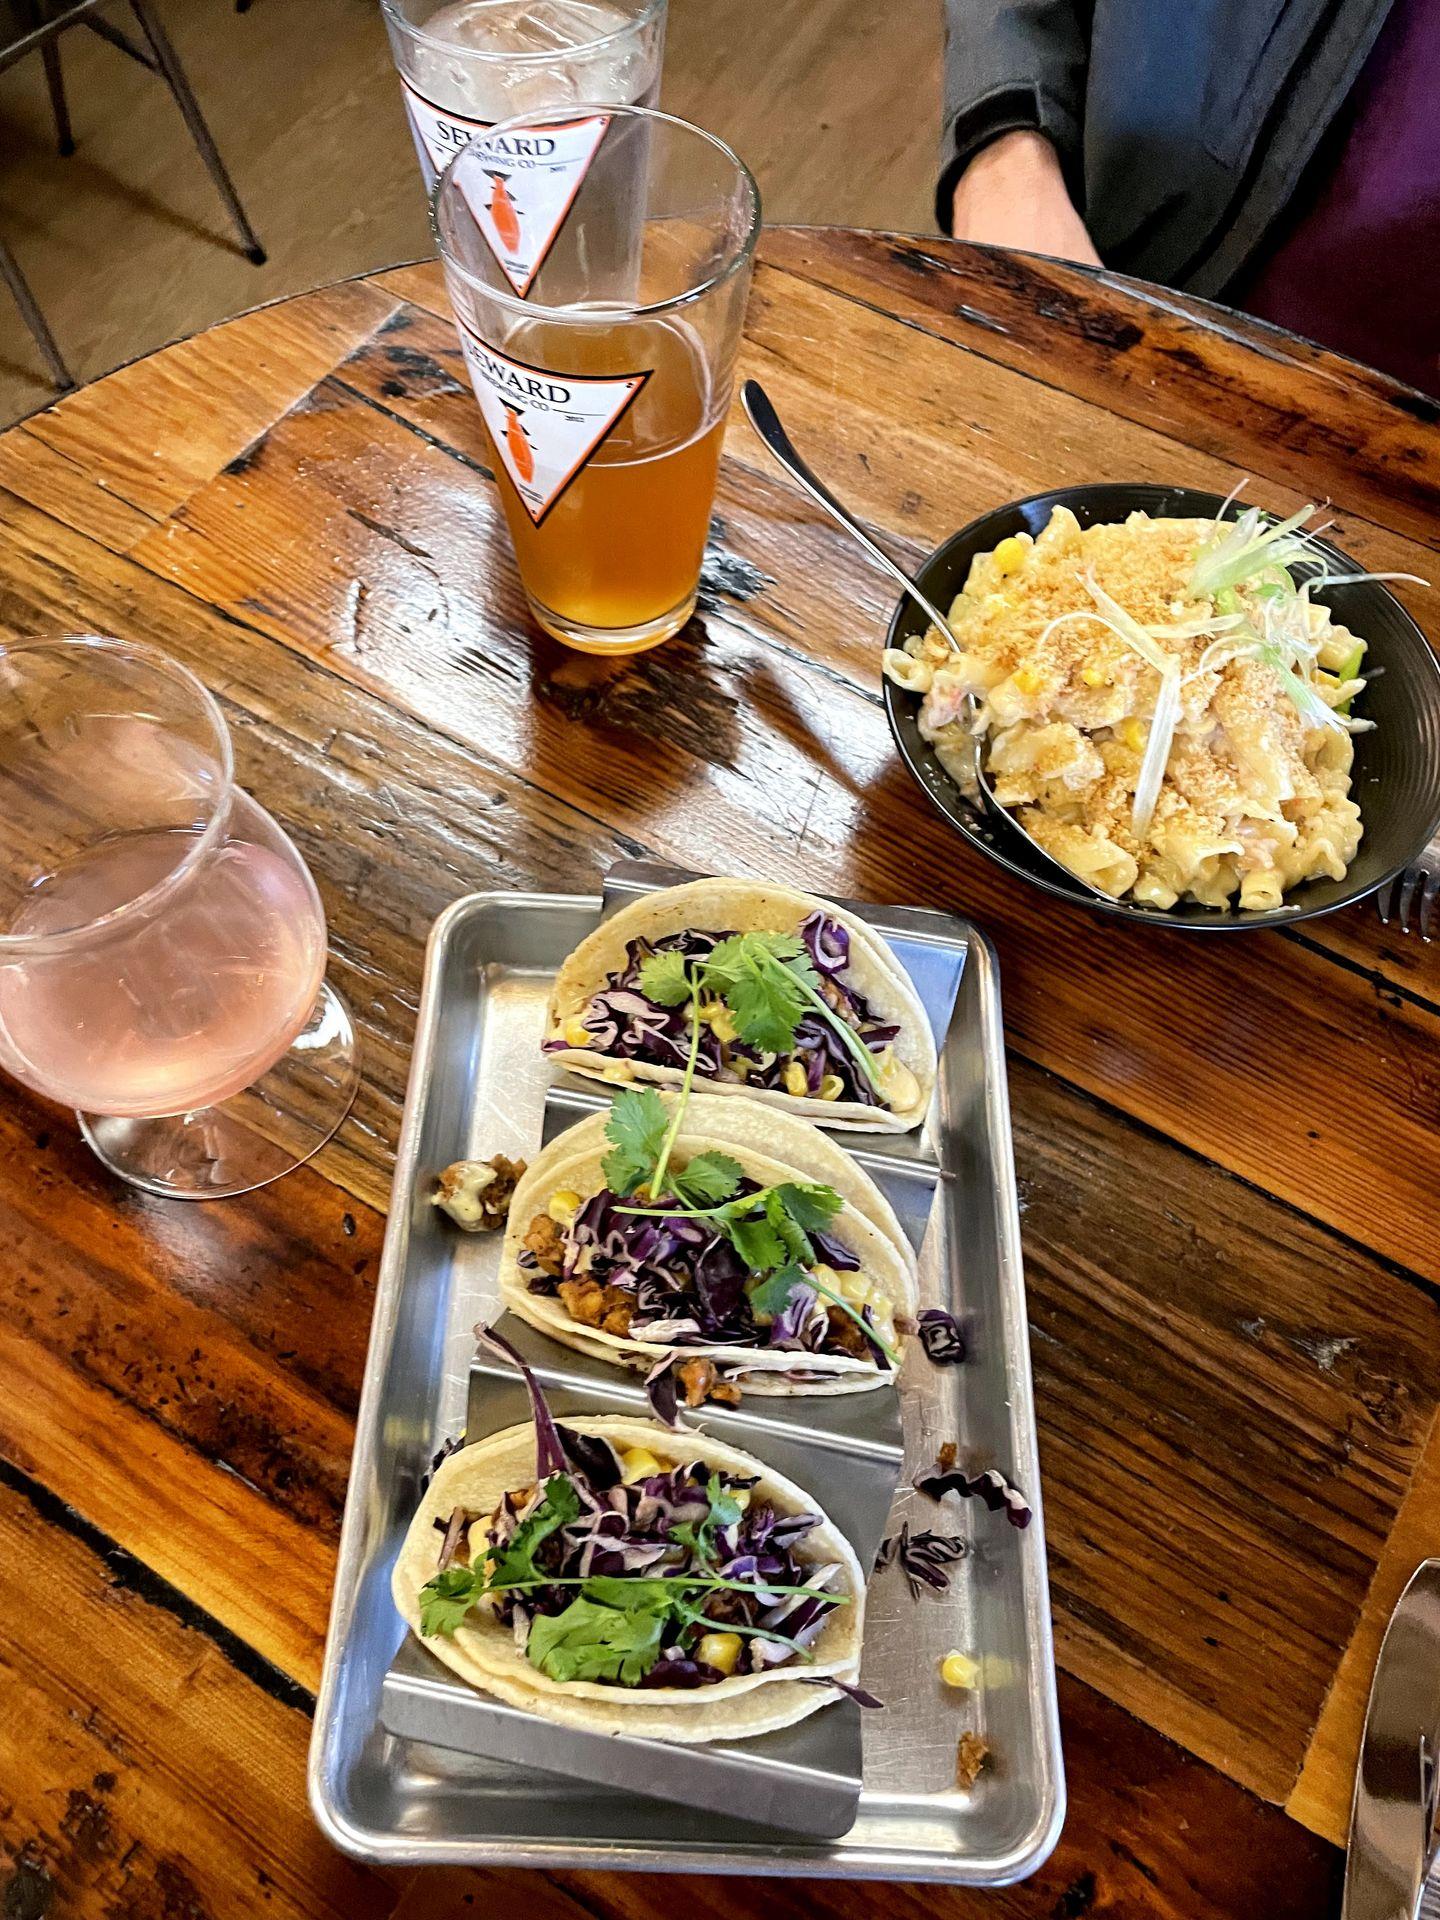 Plates of tacos and mac and cheese from the Seward Brewing Company.